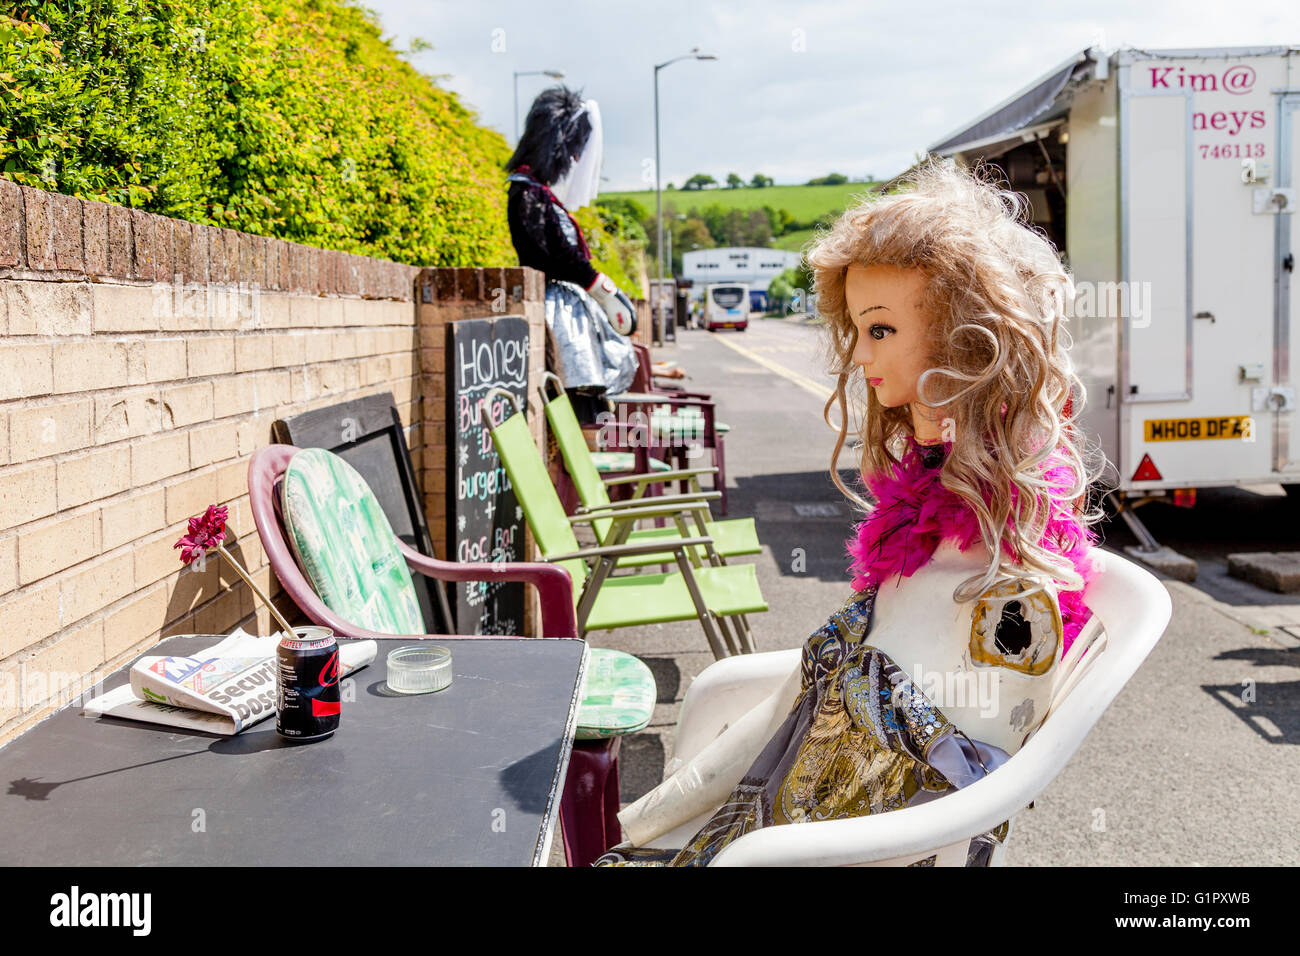 A Quirky Image Of A Mannequin Seated Outside A Mobile Cafe, Brighton, Sussex, UK Stock Photo